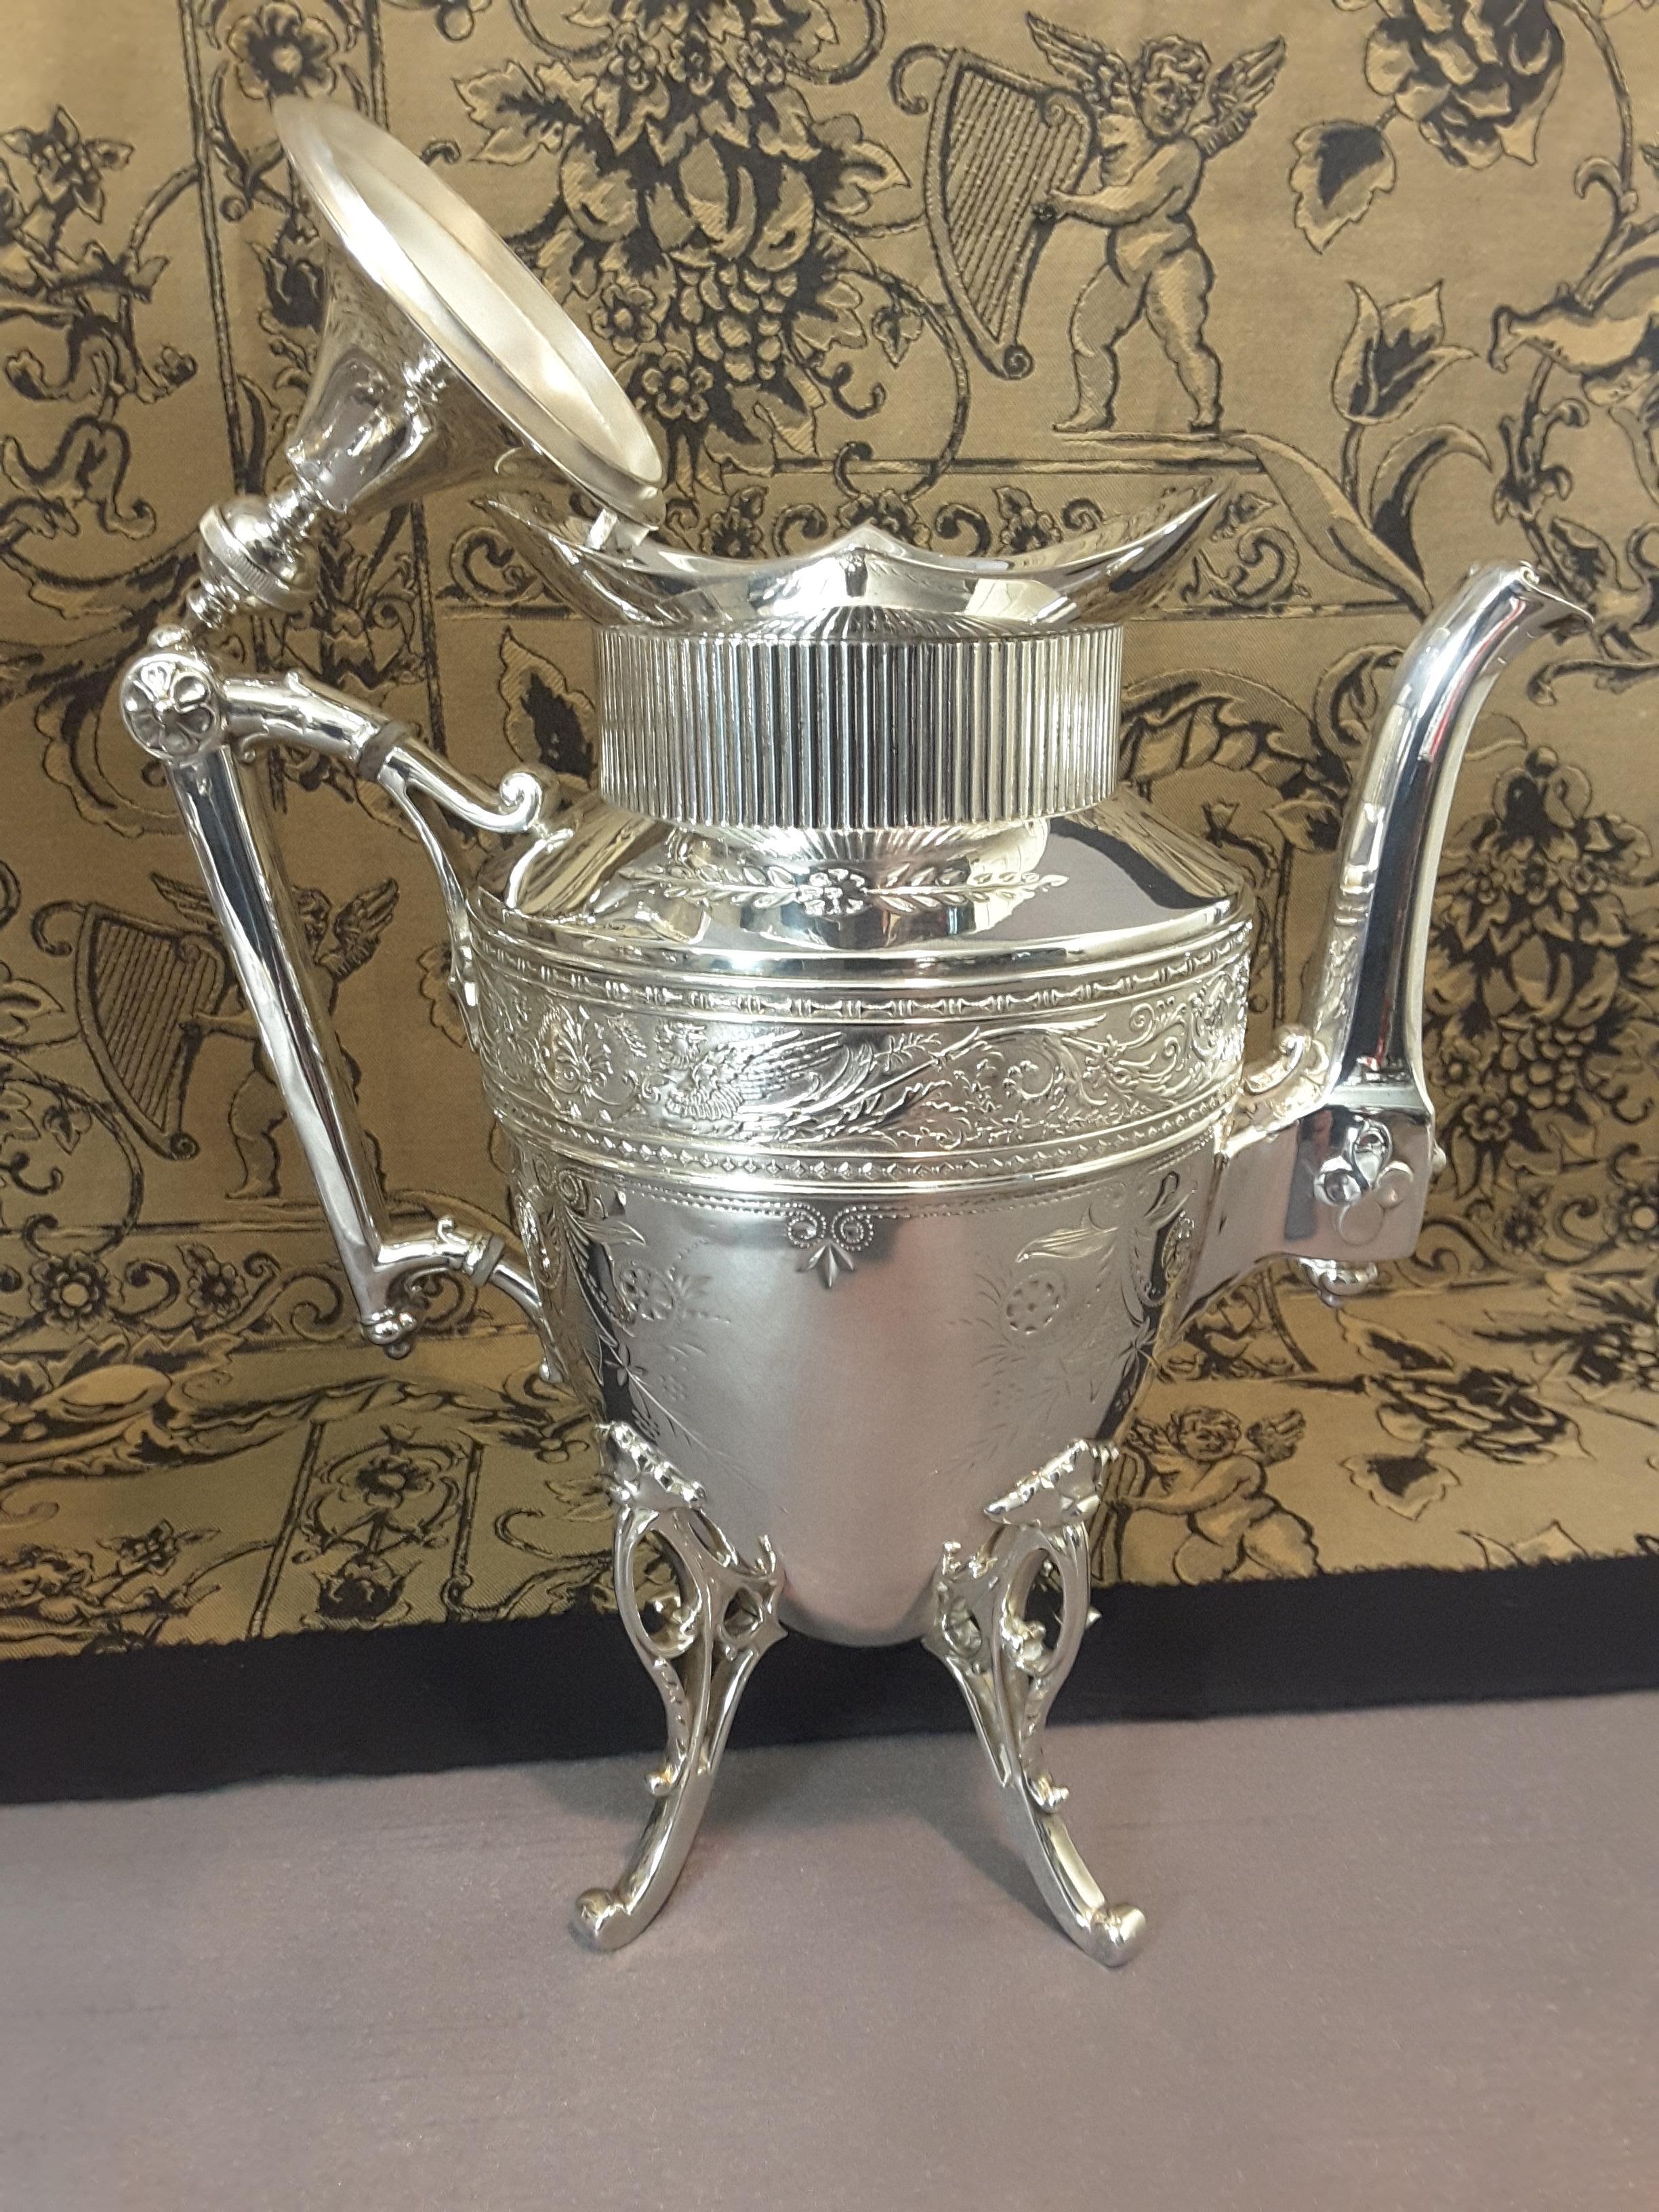 Exquisite Aesthetic Movement Silverplated Tea Service by Simpson, Hall & Miller For Sale 3